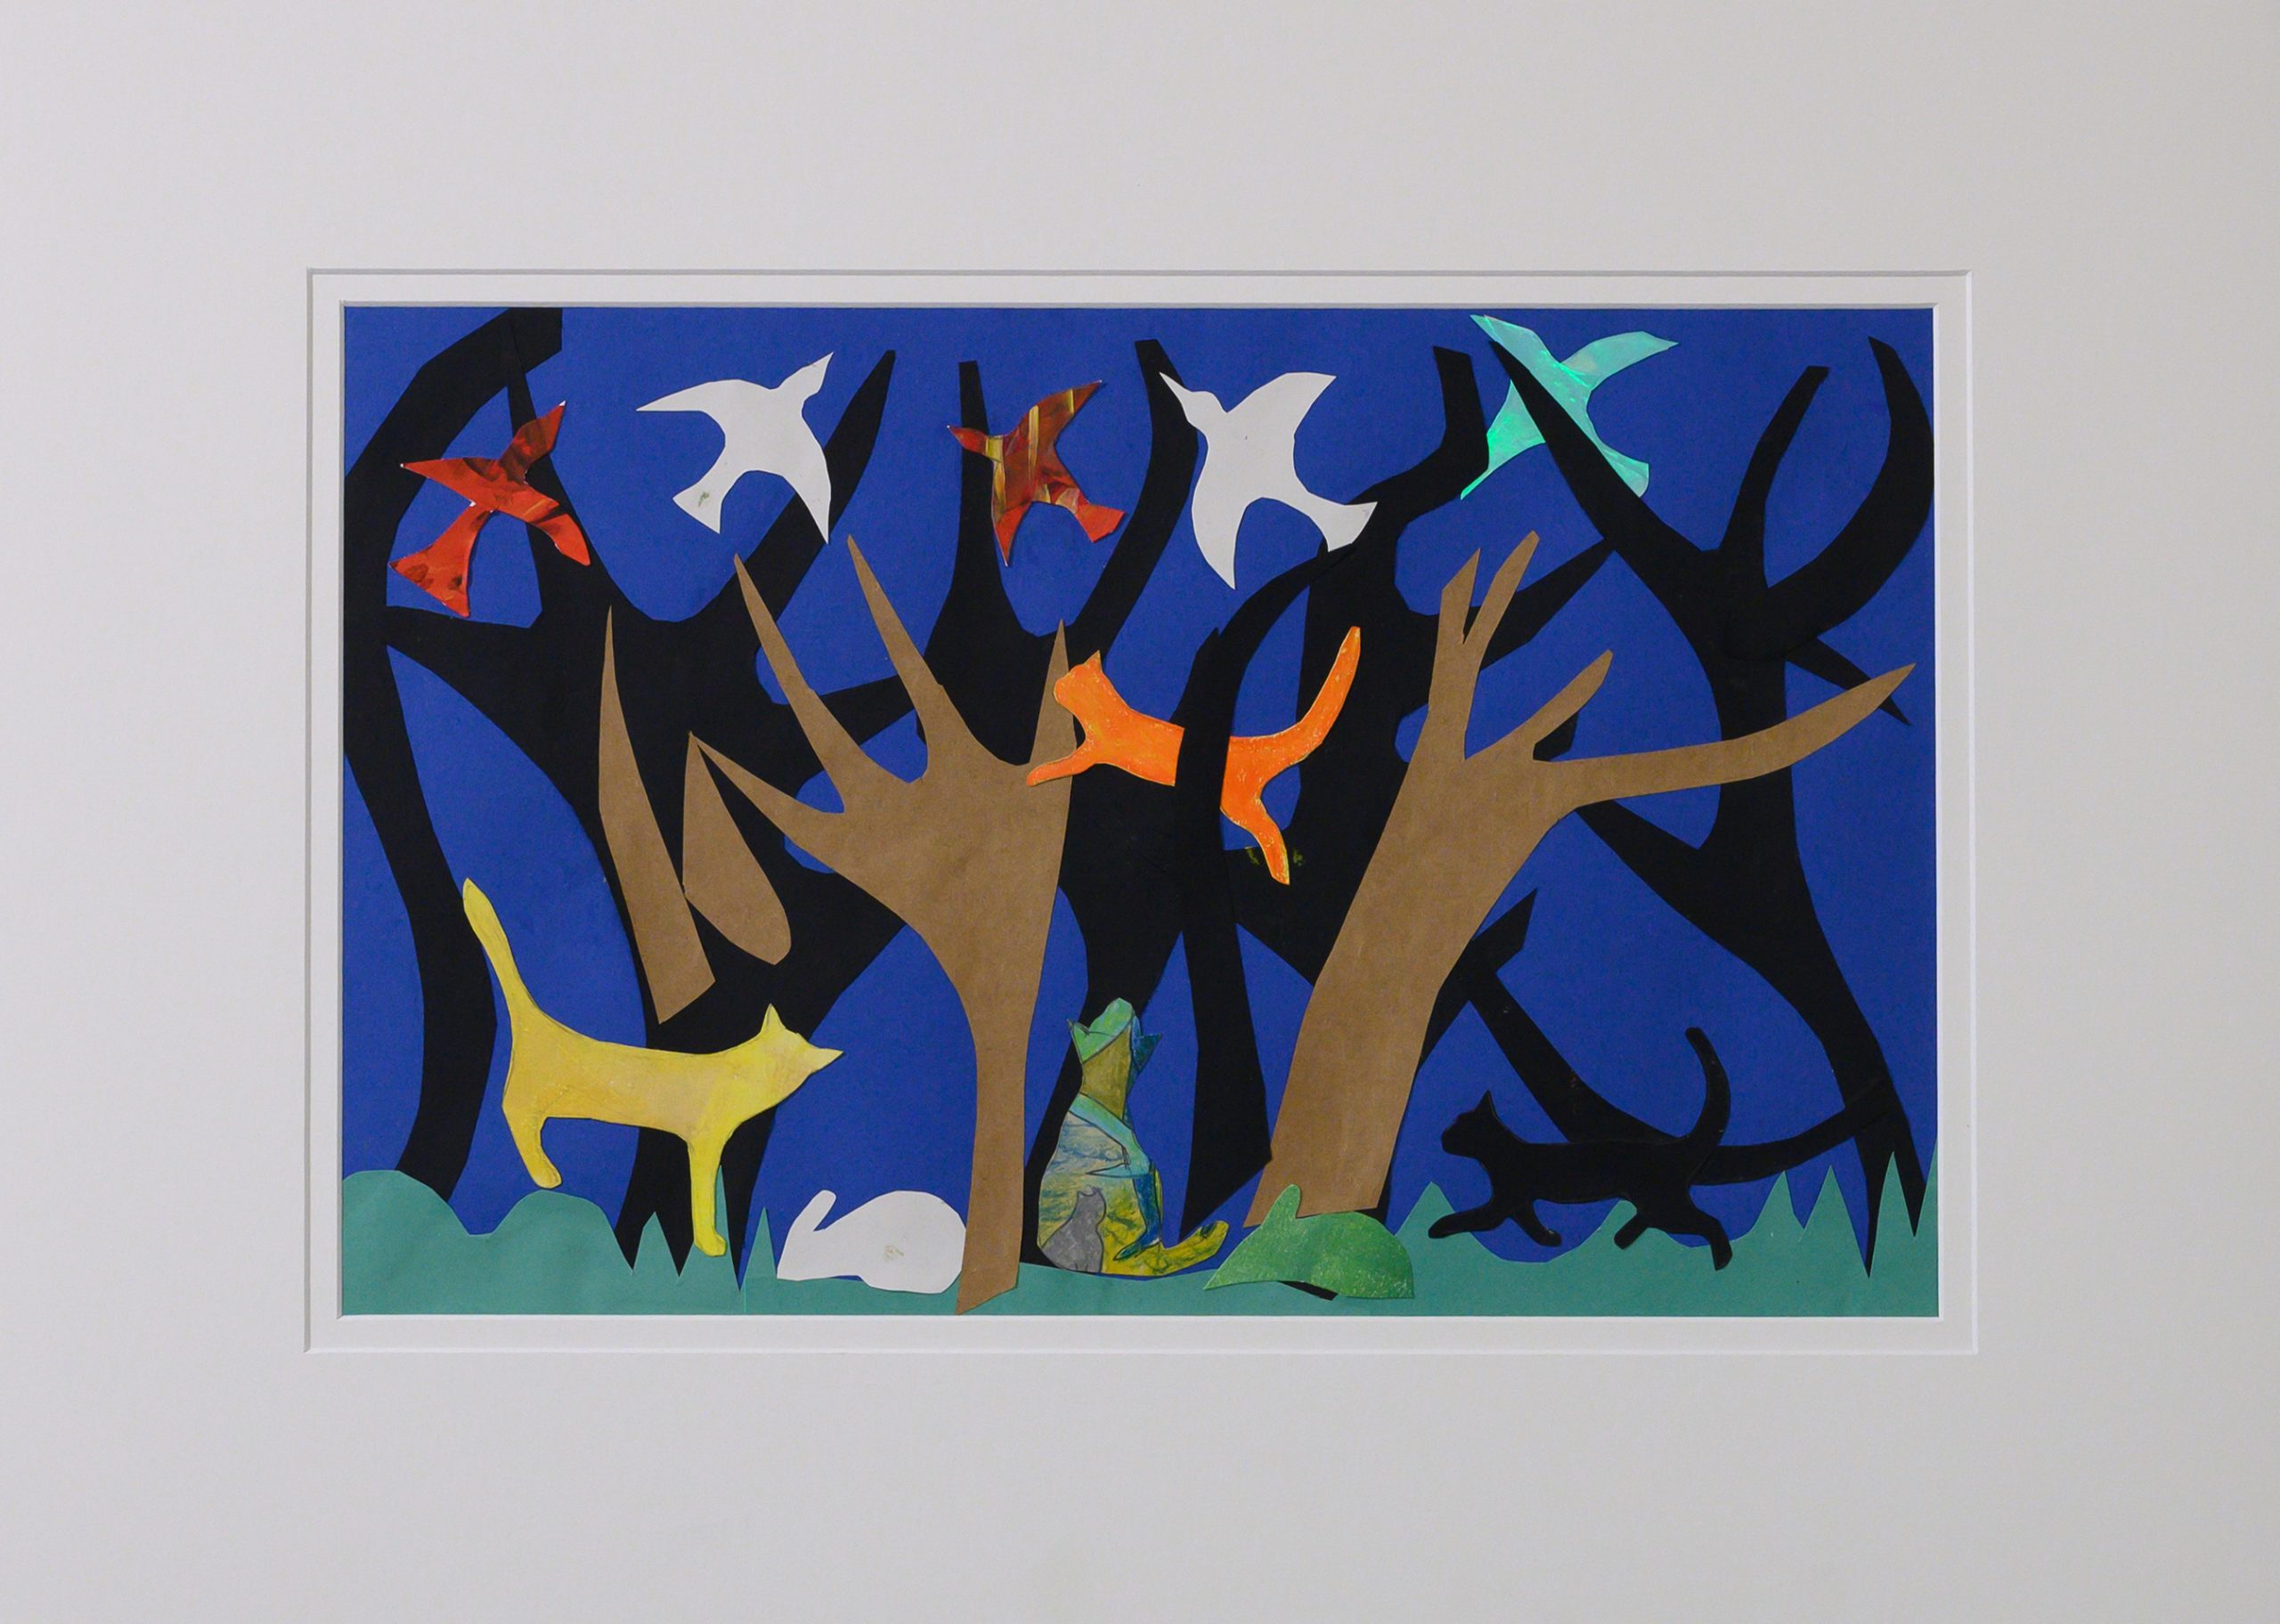 Unframed artwork by Stephanie Yoannidis of a colourful collage featuring four cats playing amongst silhouetted trees with birds flying in the dark blue sky